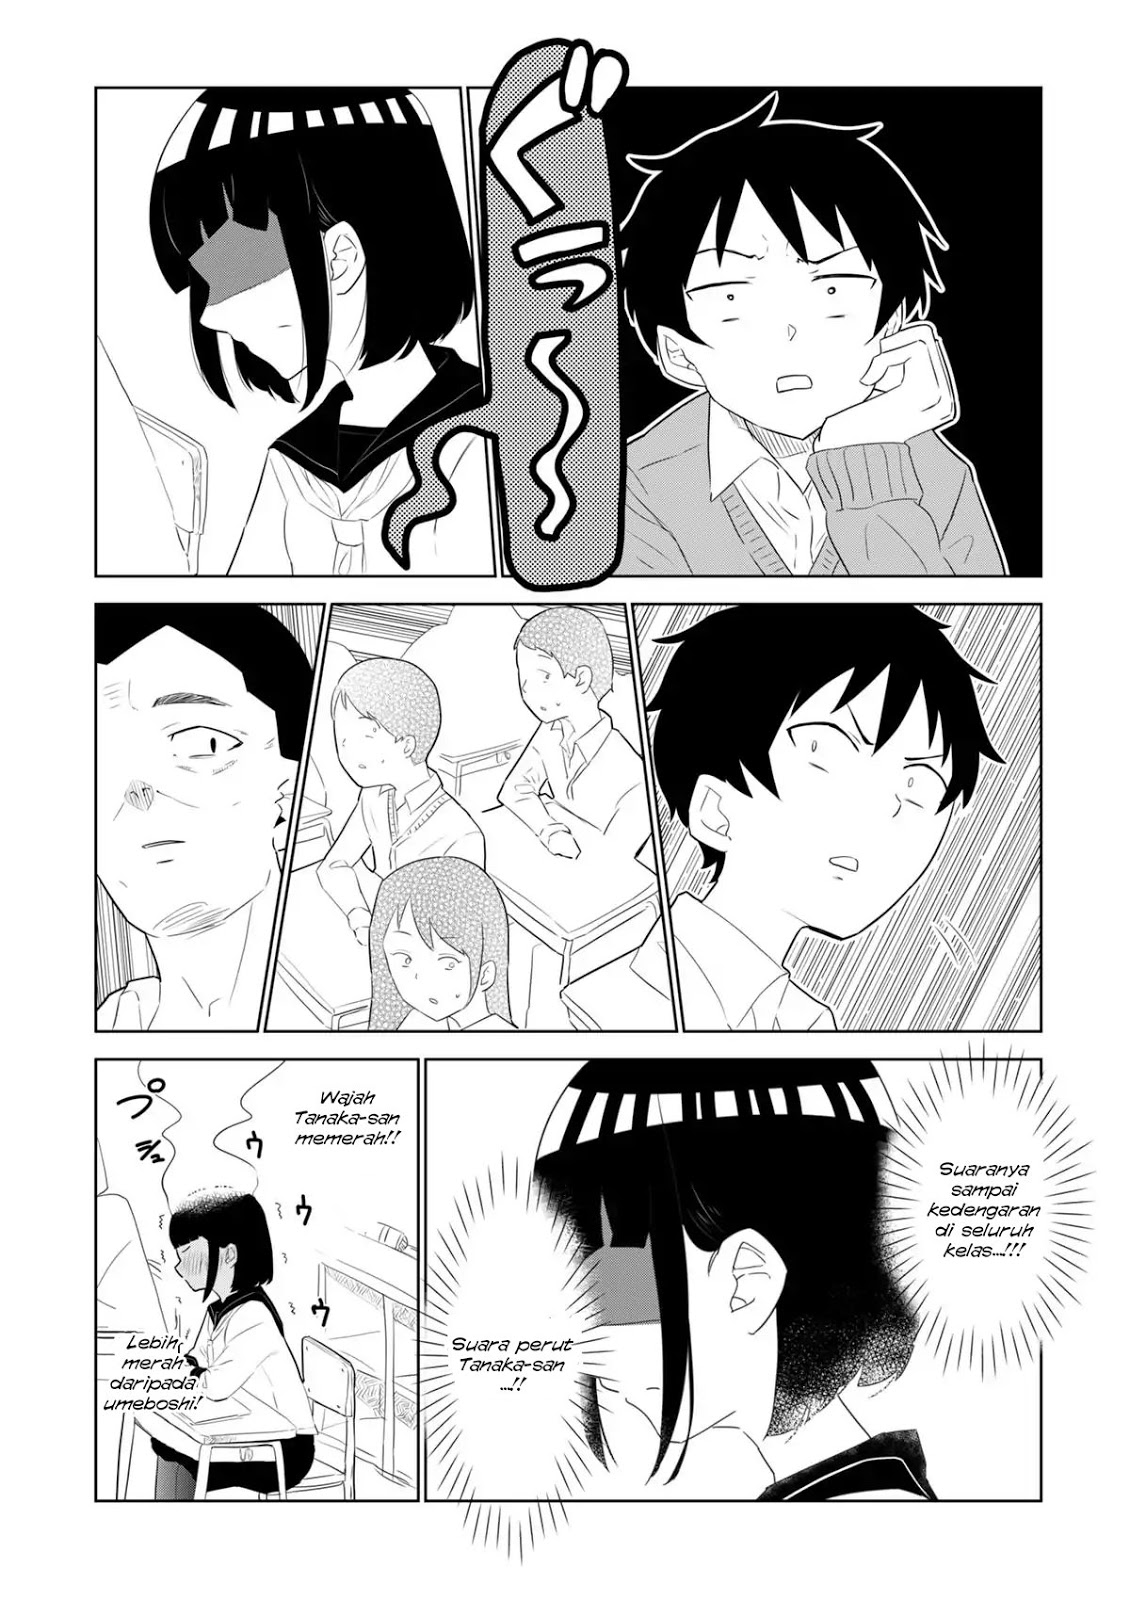 My Classmate Tanaka-san Is Super Scary Chapter 02